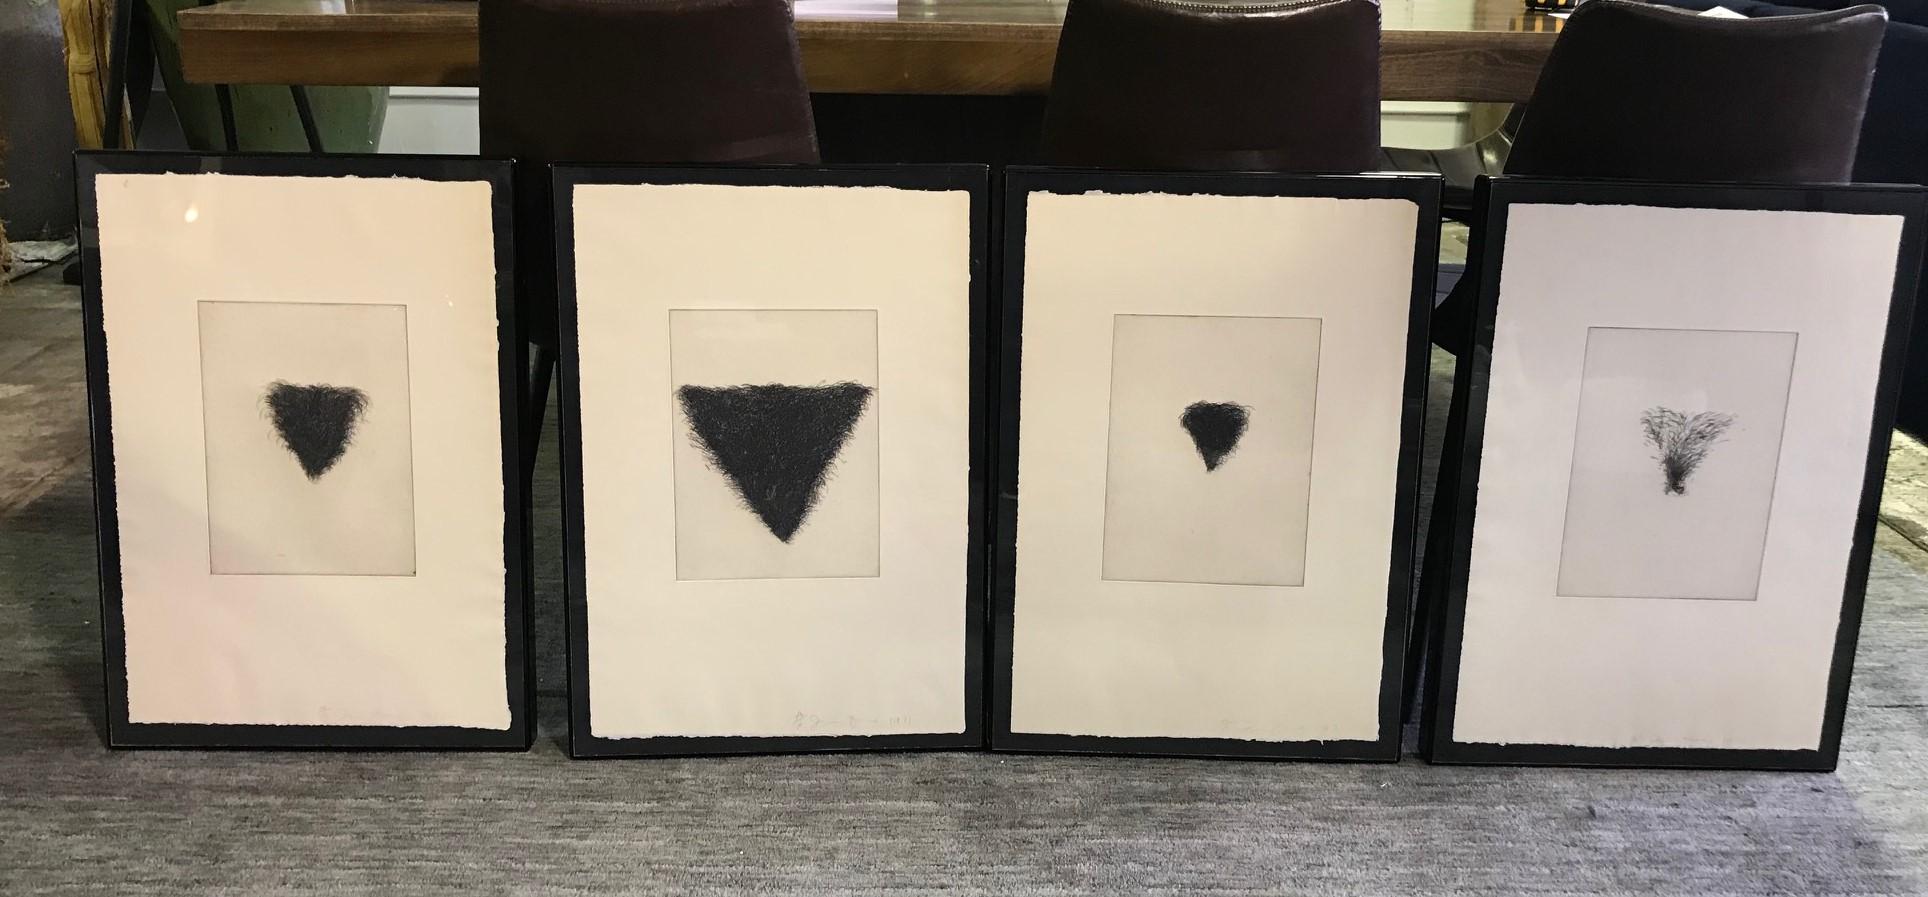 A somewhat comical and a tad bit naughty set of four framed etchings by famed American artist Jim Dine titled 